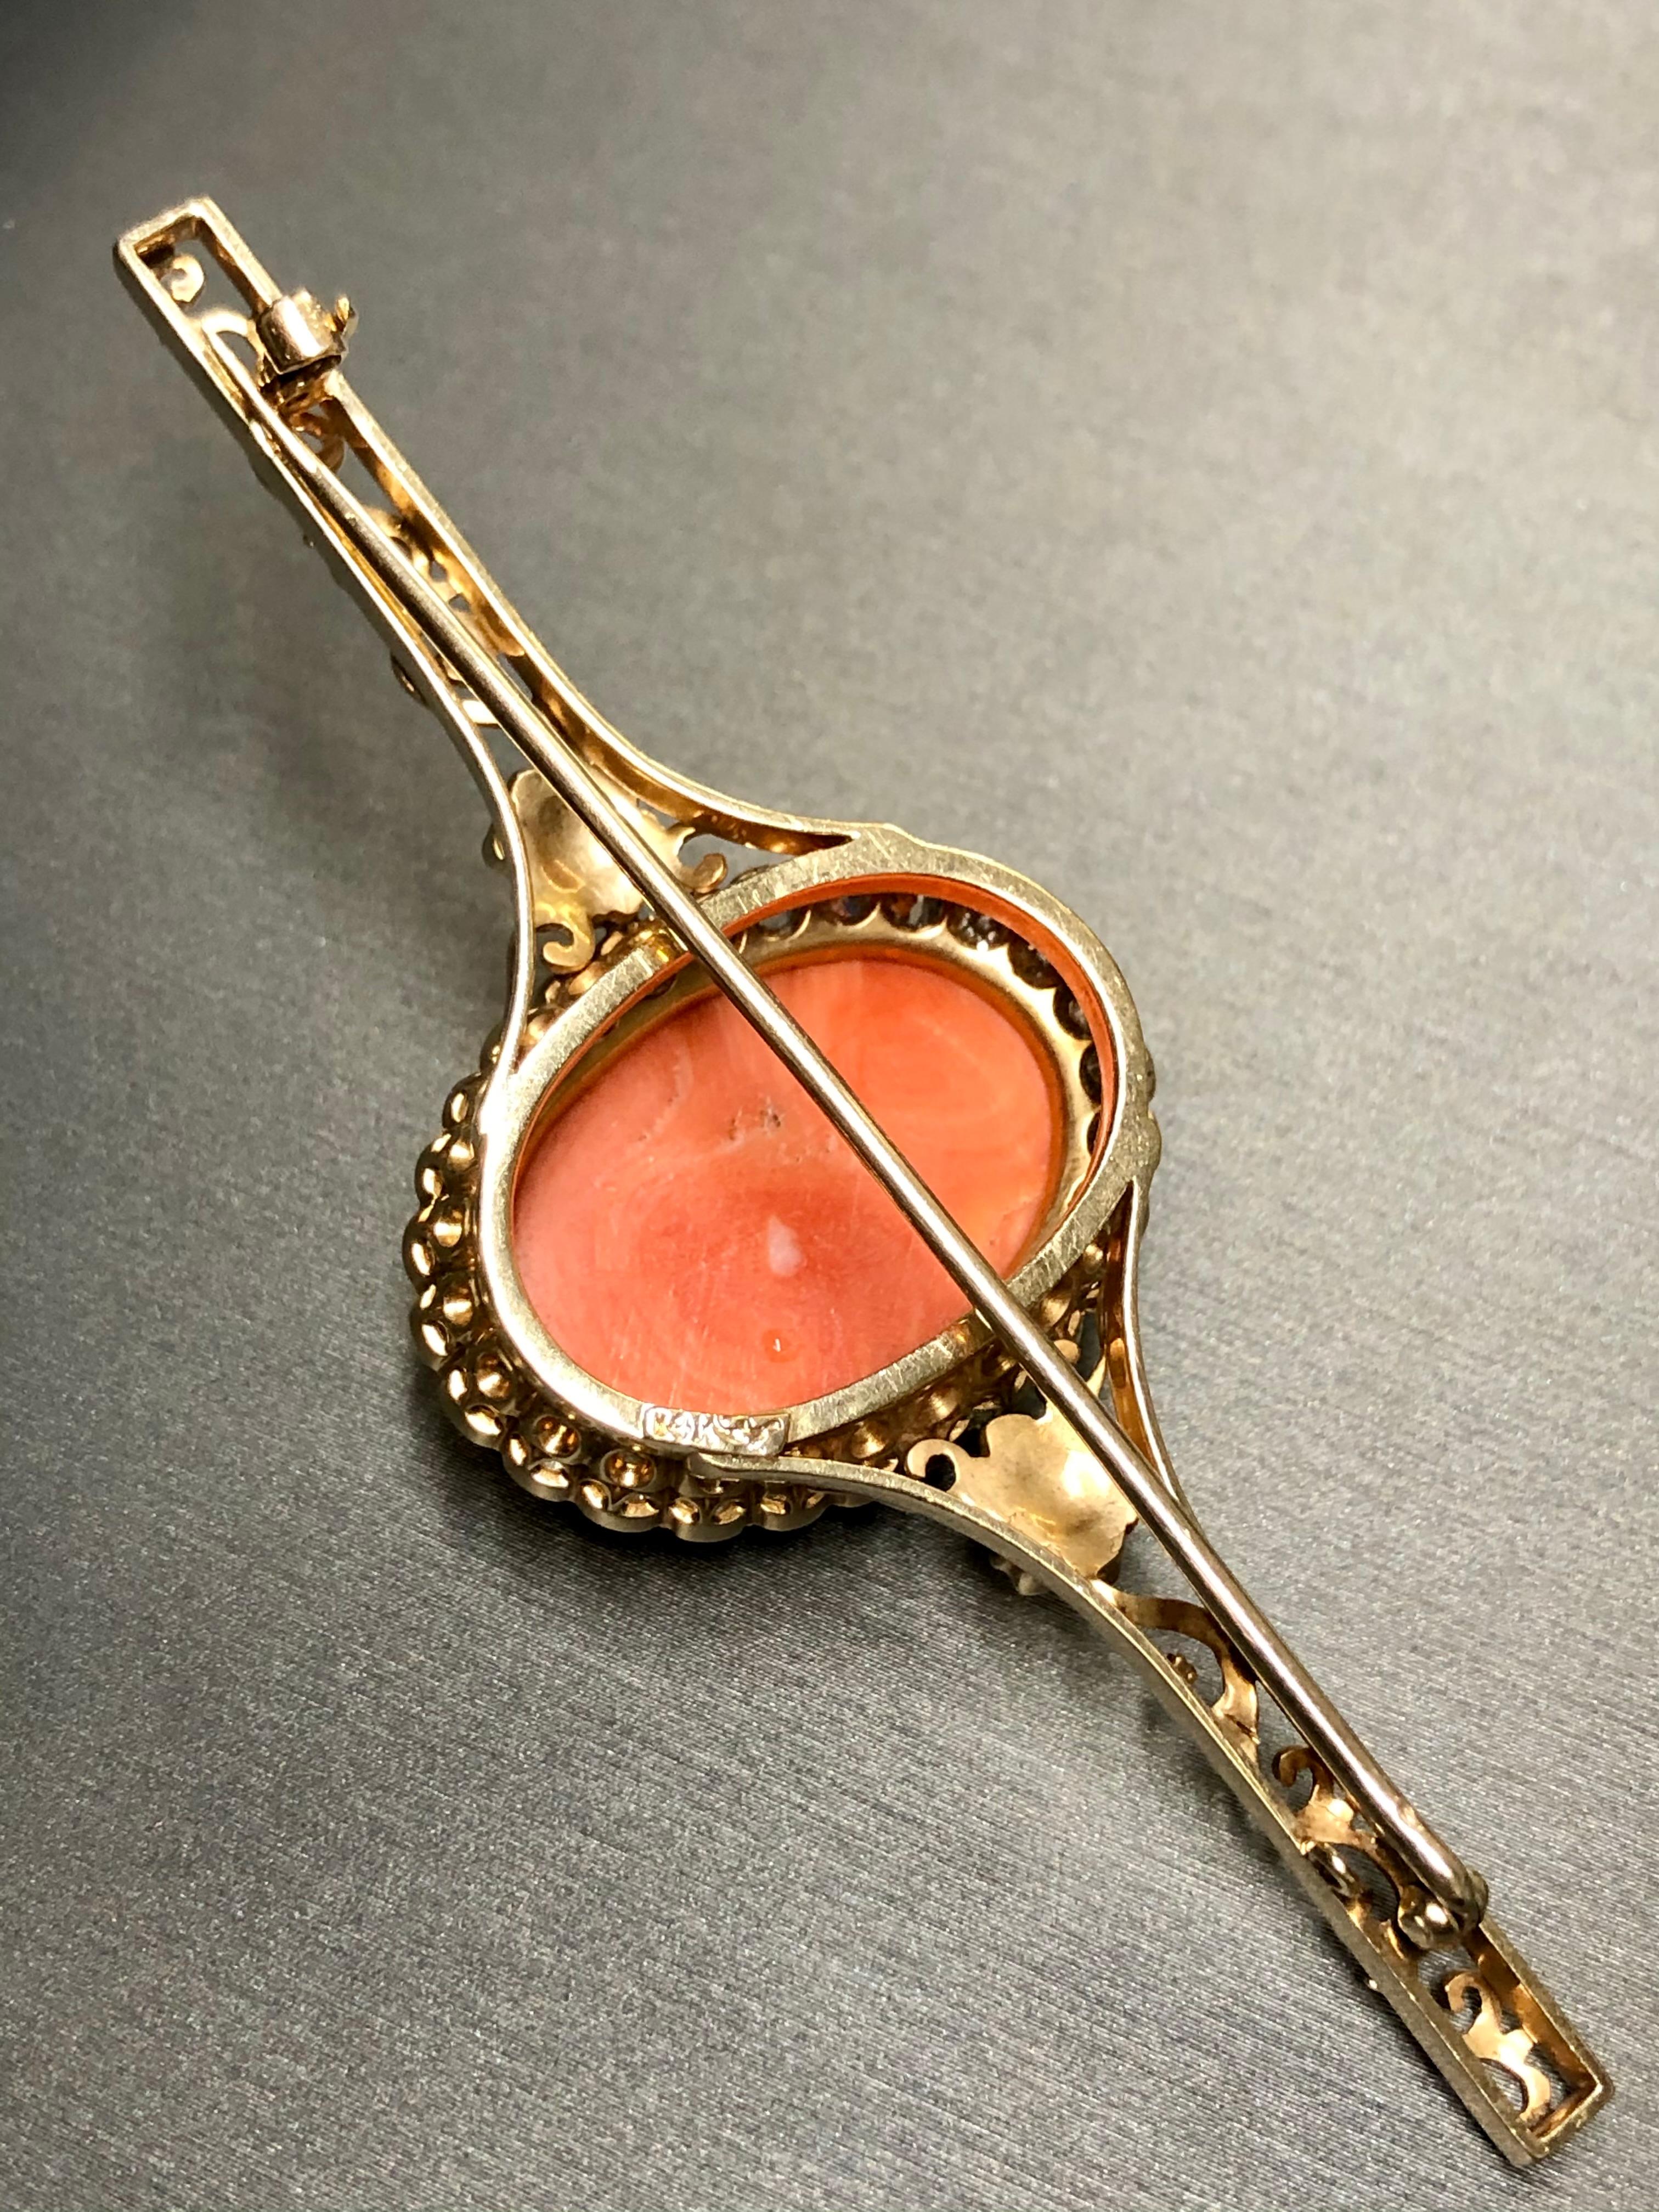 Antique Victorian Mine Cut Diamond Coral Cameo Brooch Pin 2.16cttw For Sale 1